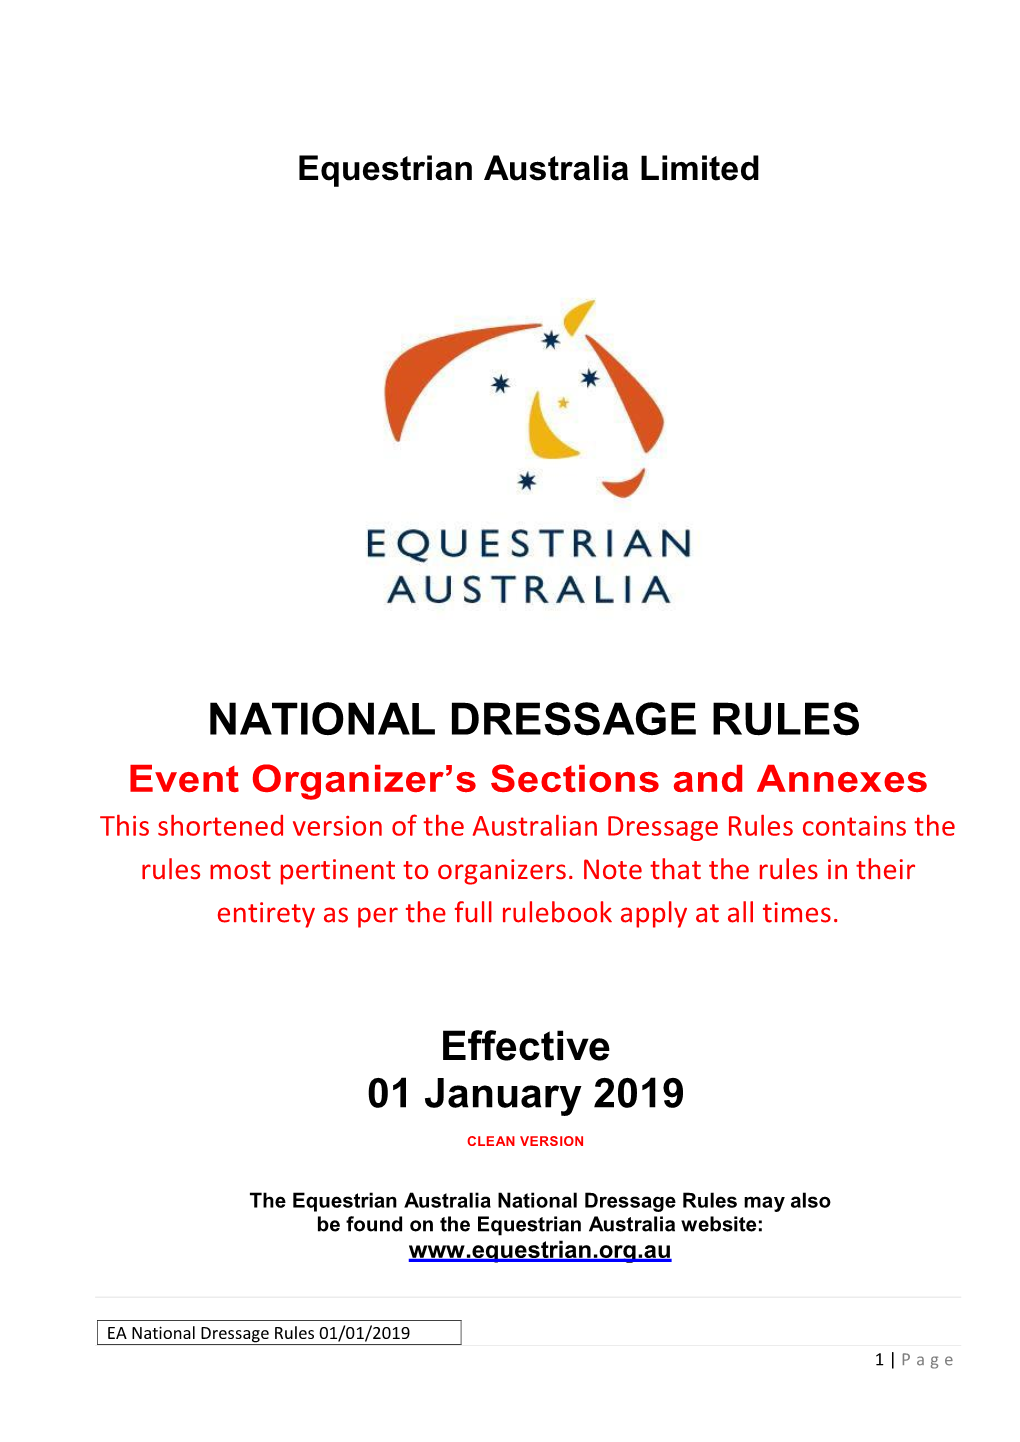 National Dressage Rules